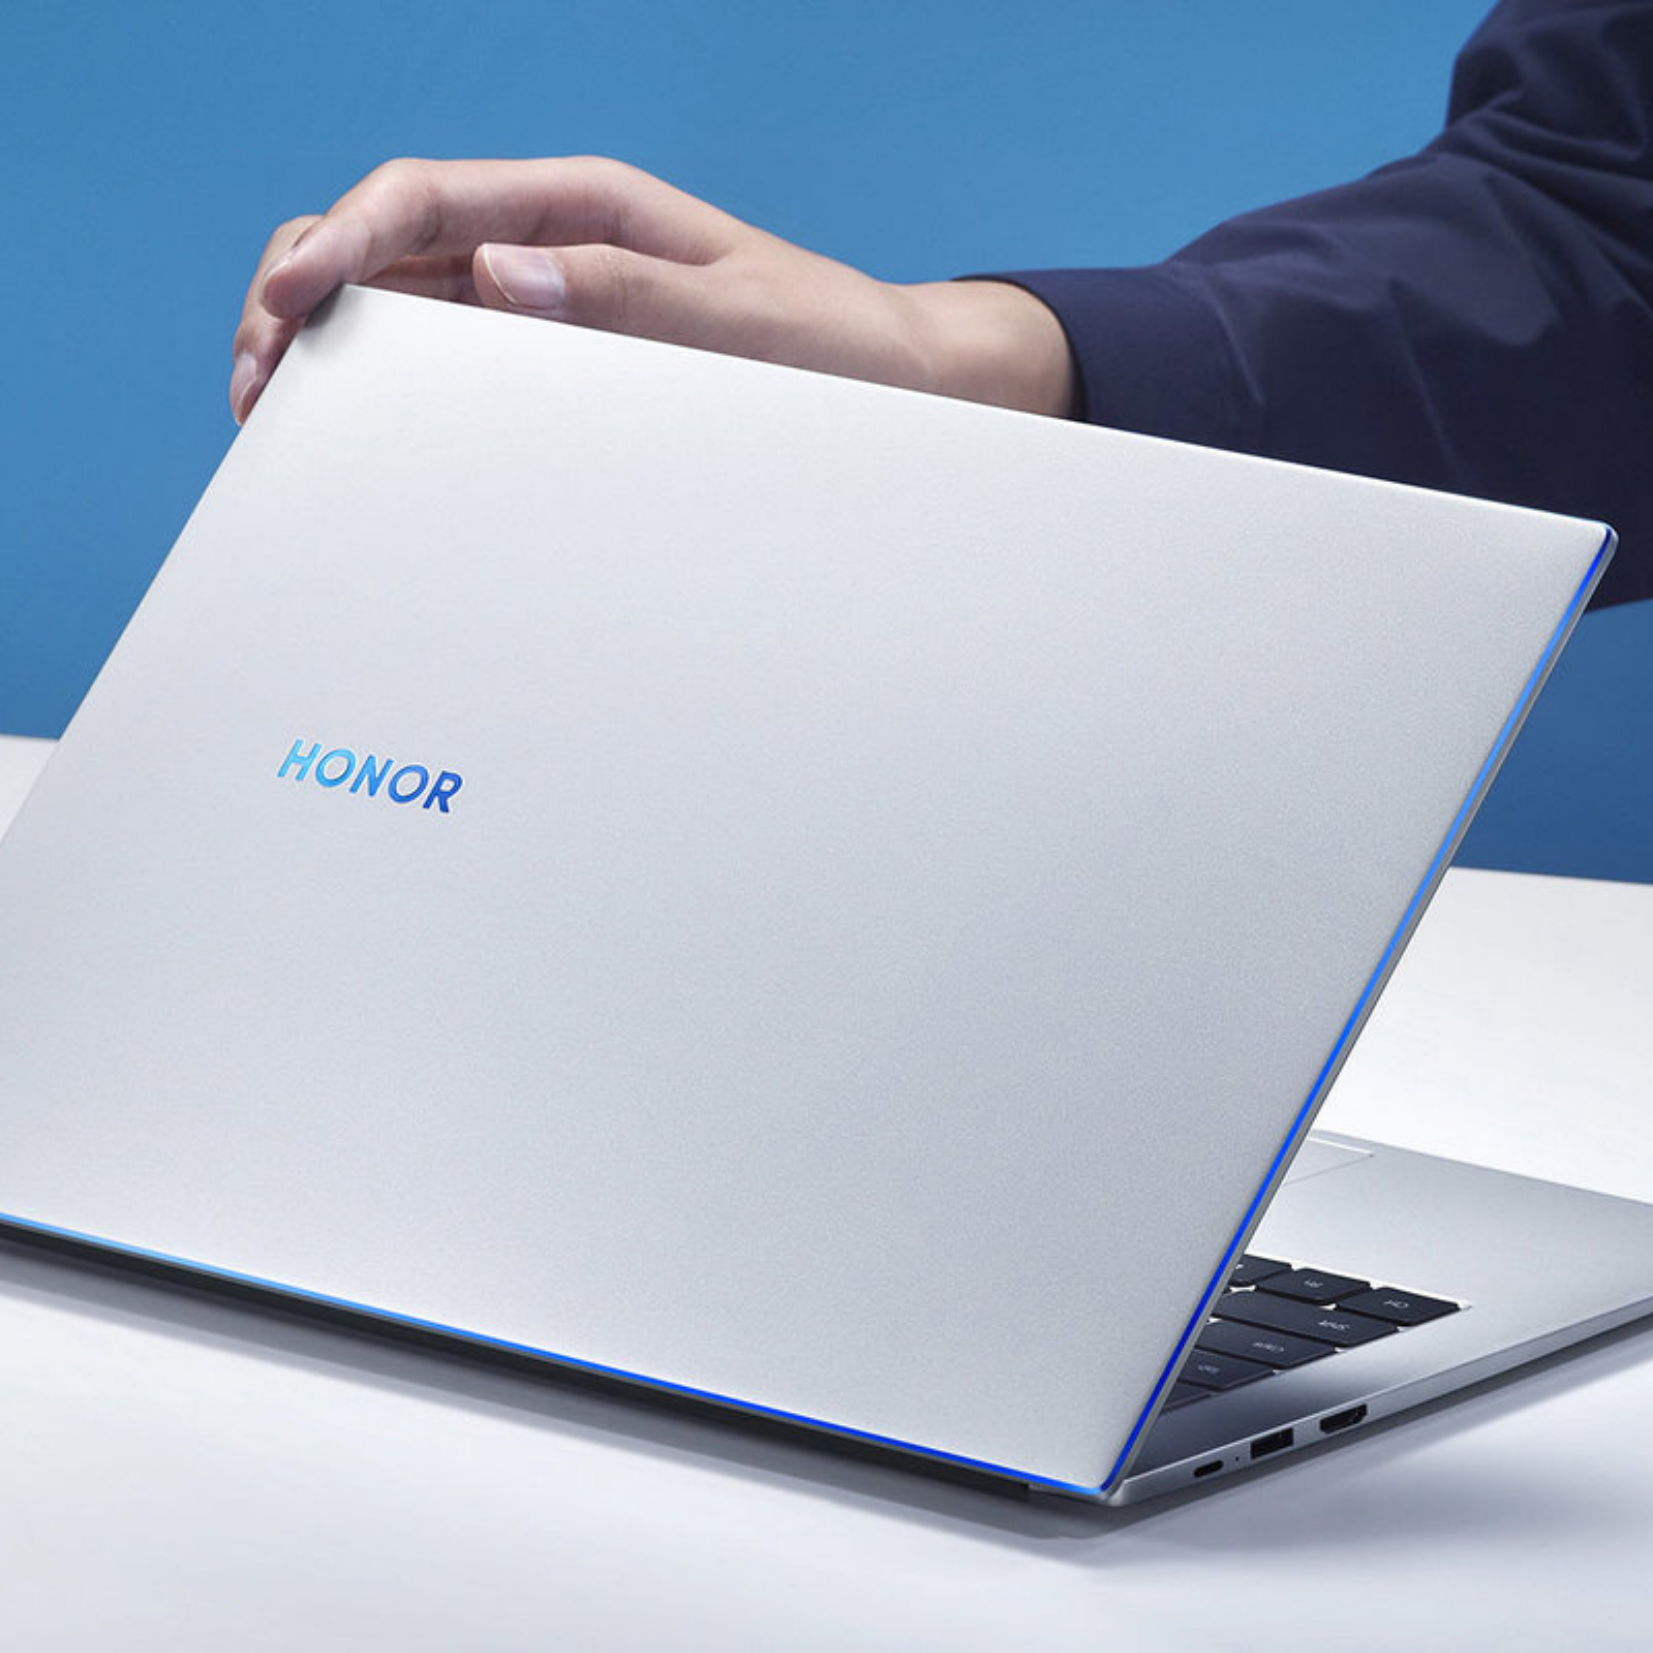 Honor MagicBook Pro (16GB + 512GB) - 16.1Inch FullView Display | Dual Fans & Dual Heat Pipes | 65W Fast Charging